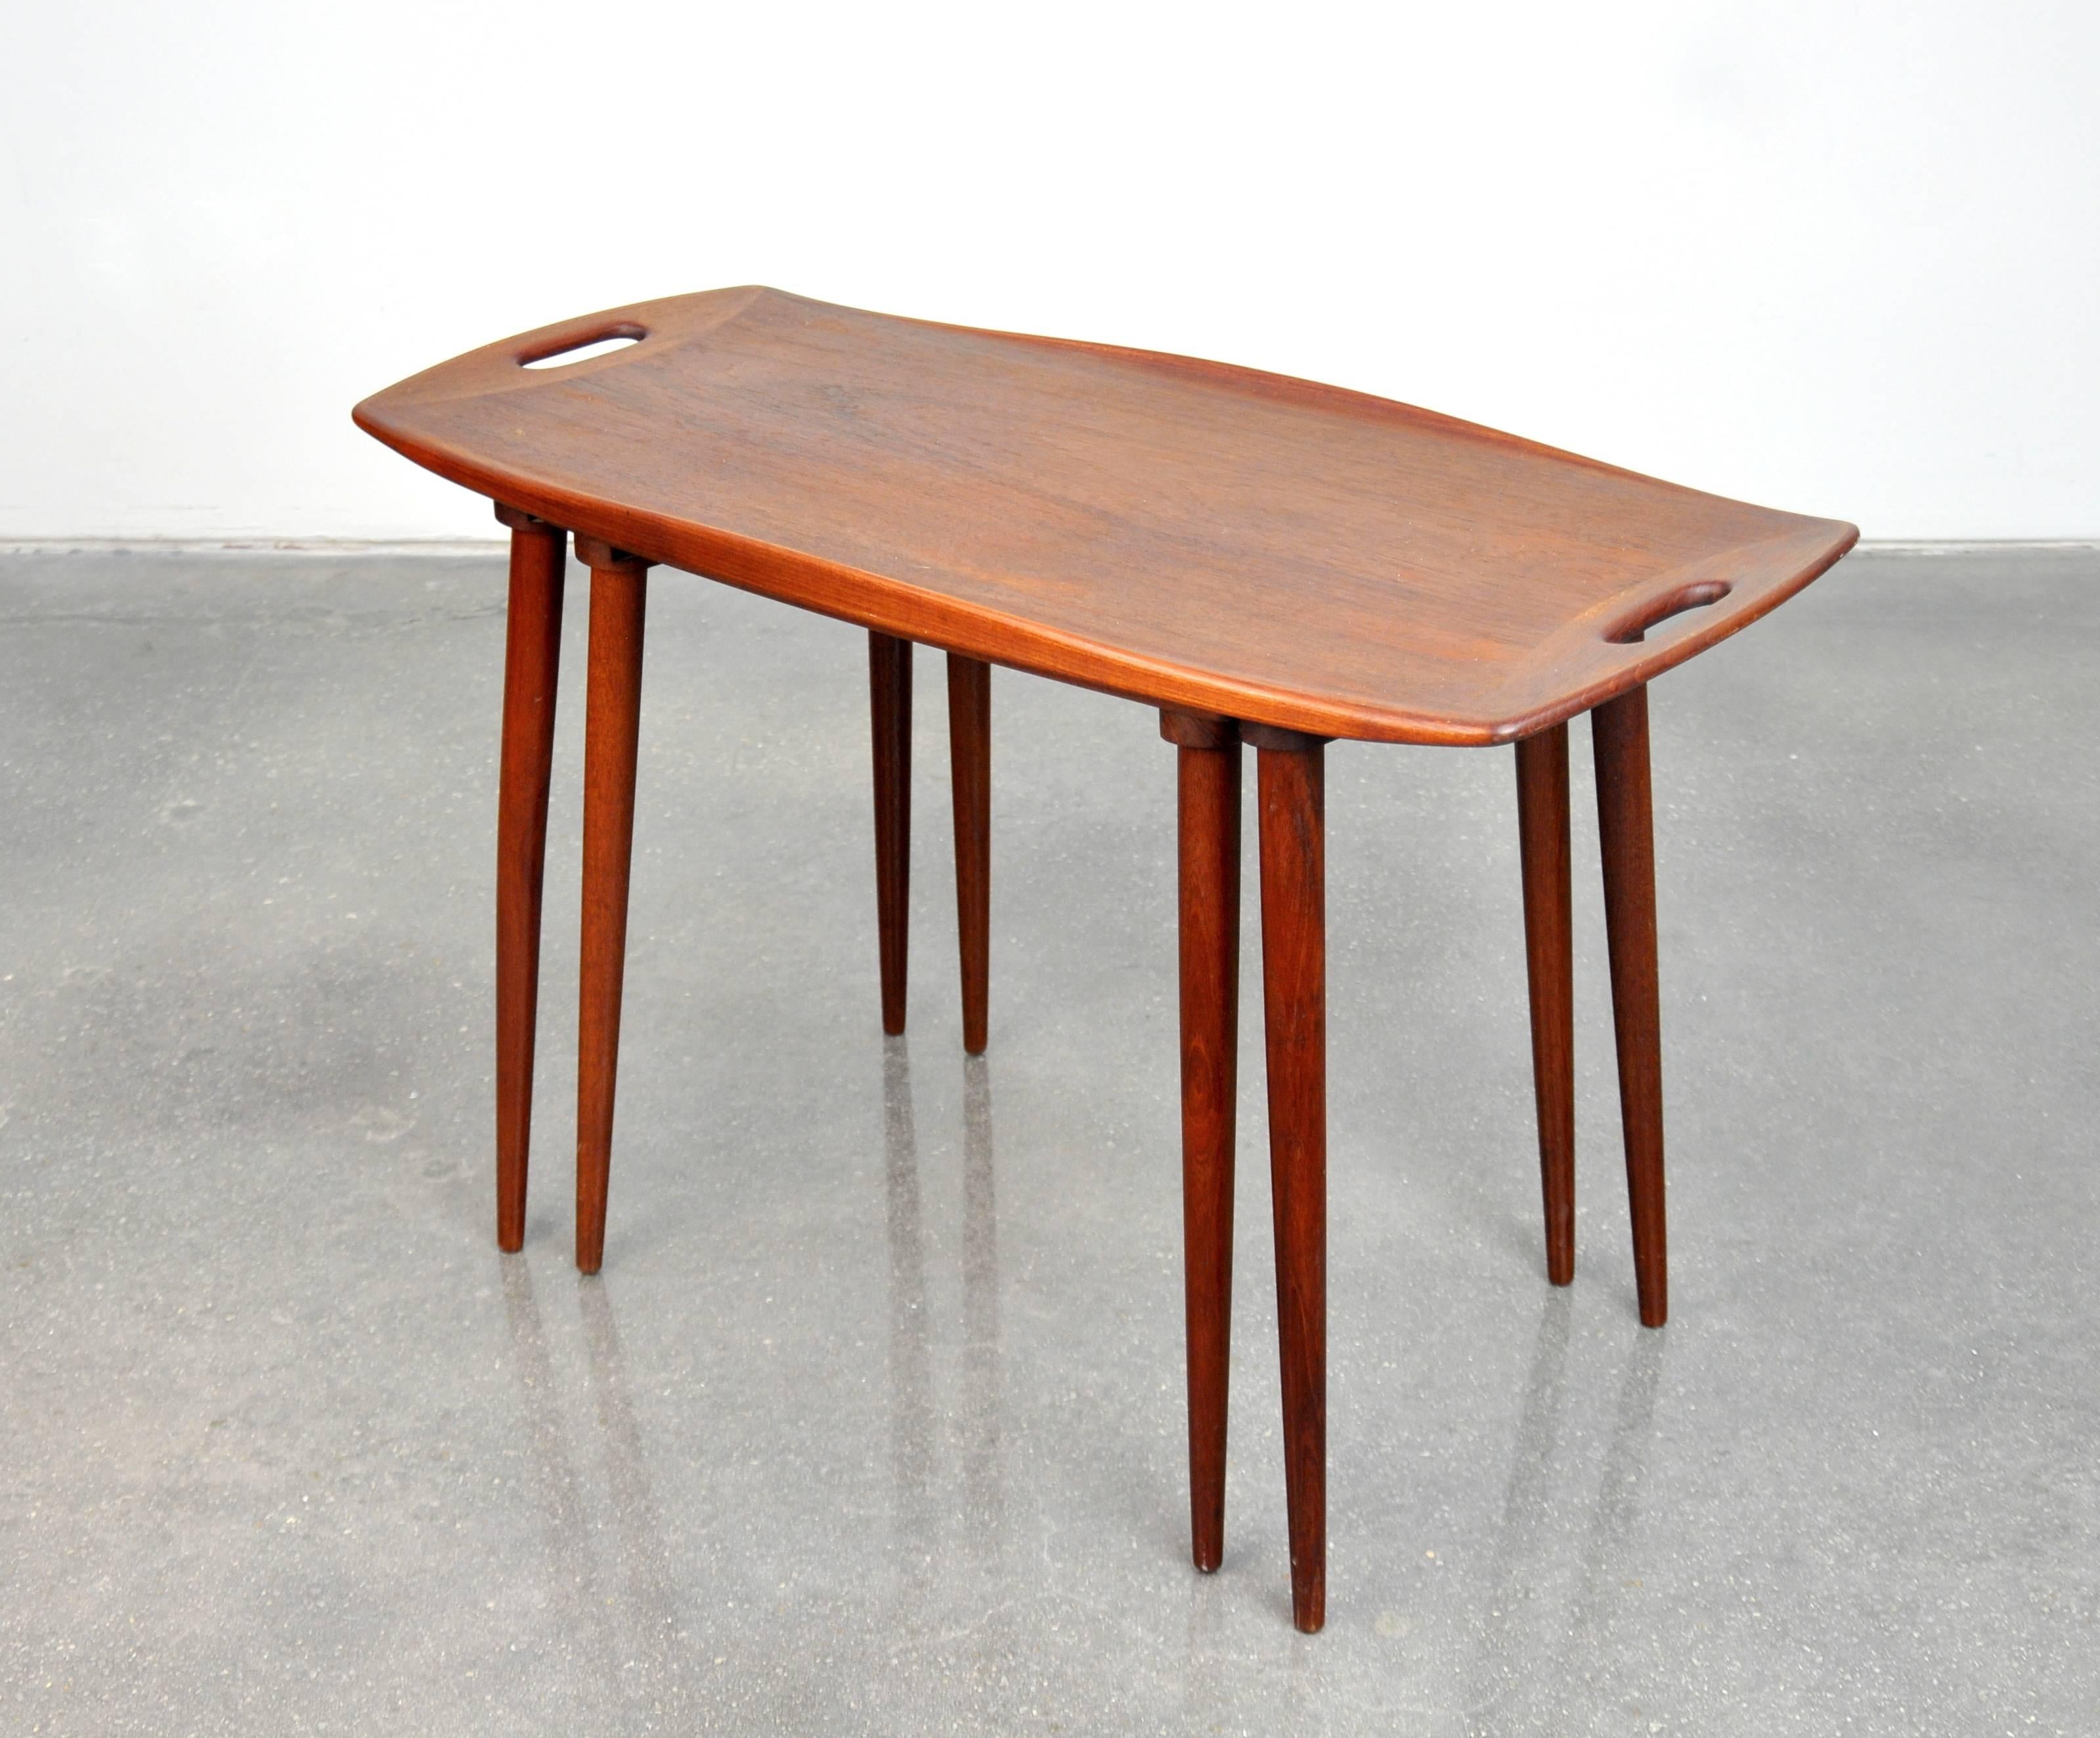 A pretty Danish modern teak tray table, with nesting smaller table, designed by Jens Quistgaard and made in Denmark by Nissen in the mid-1960s. The sculpted top features finger cut-outs at each end, raised edges and slender, tapered legs. A